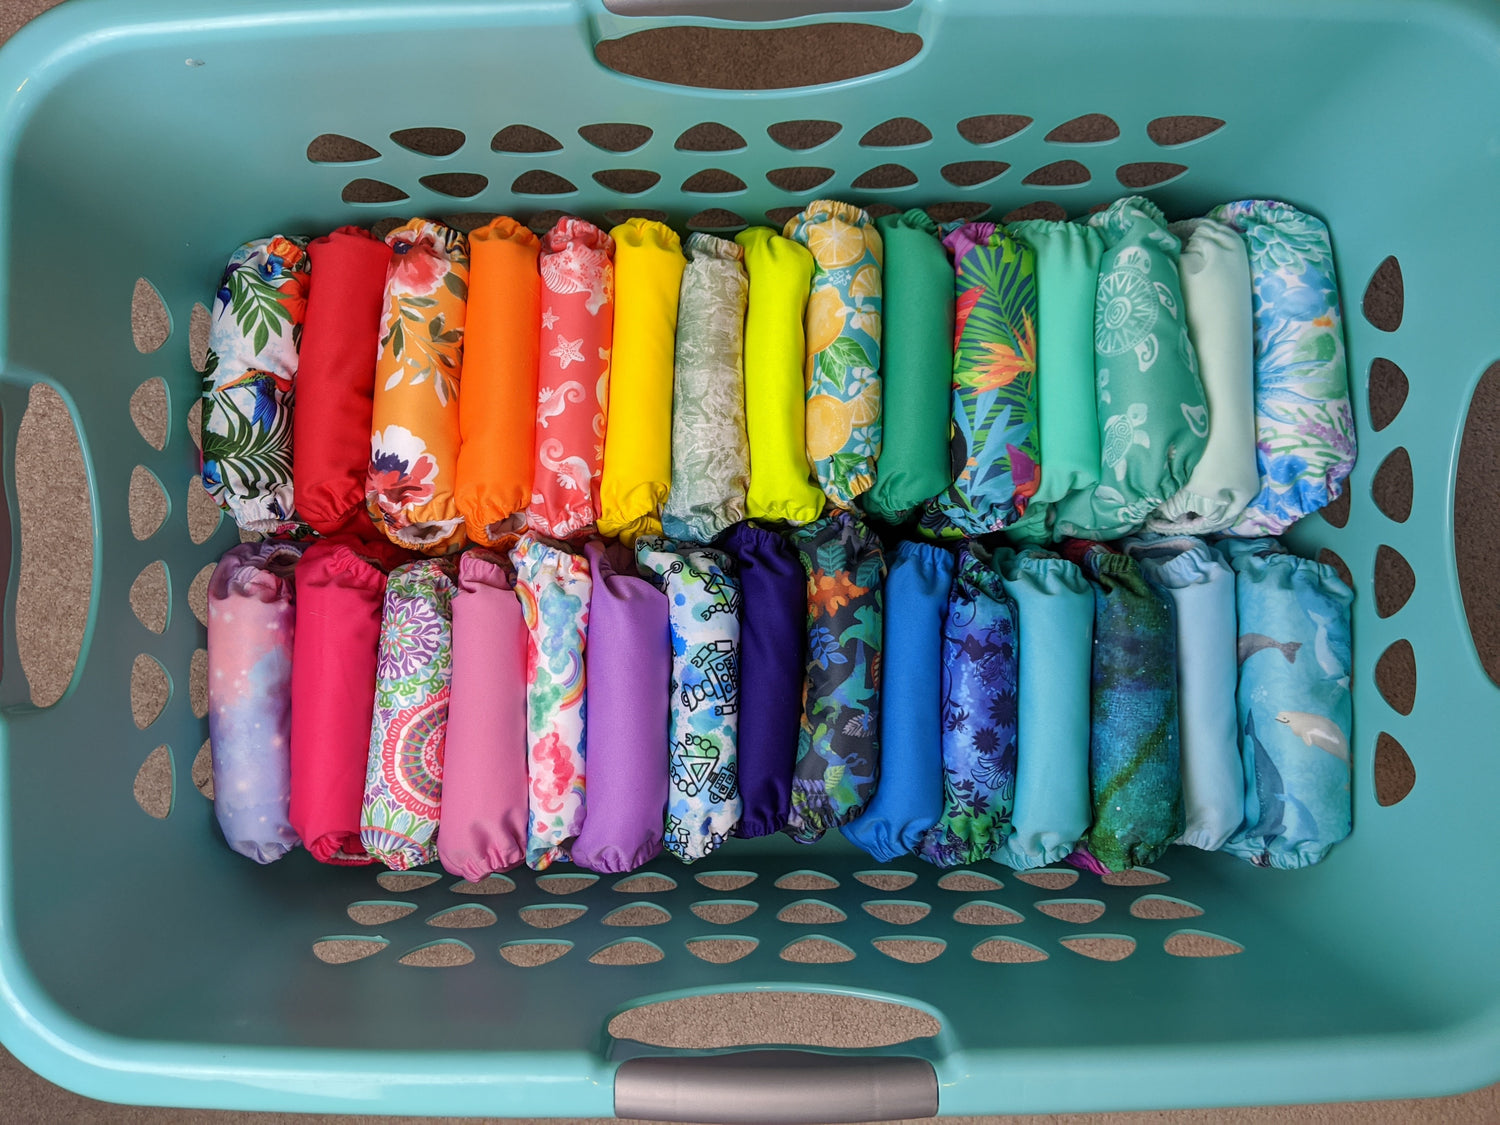 Blue basket of colorful cloth diapers